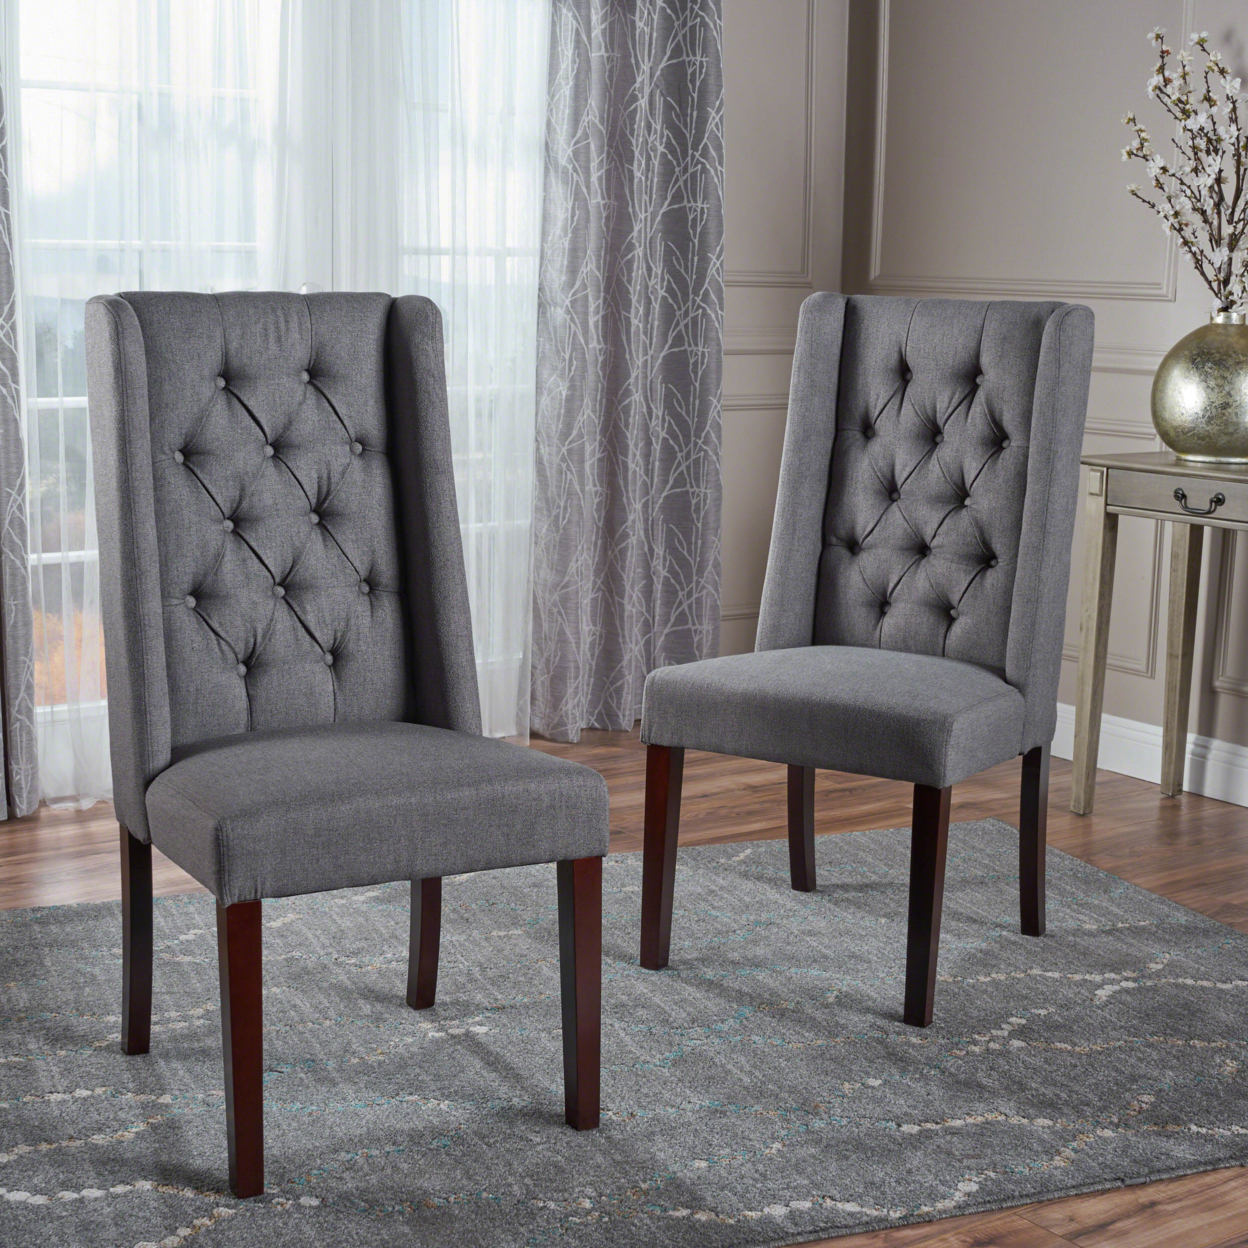 Billings Tufted Fabric High Back Dining Chairs (Set Of 2) - Dark Gray